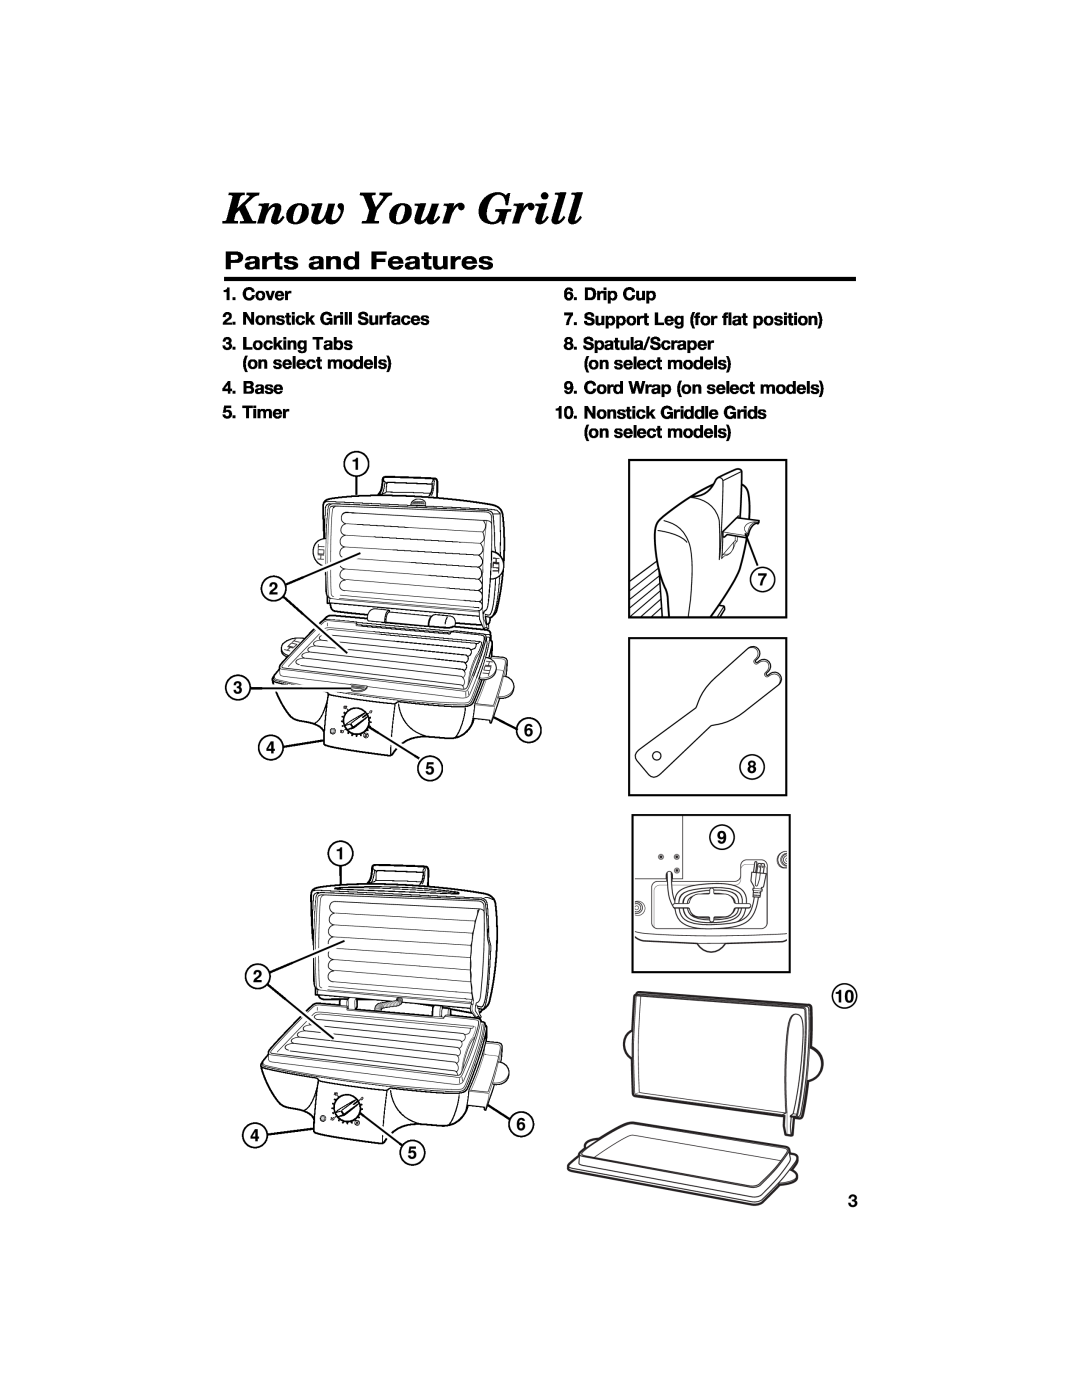 Hamilton Beach 840135600 Know Your Grill, Parts and Features, Cover, Drip Cup, Nonstick Grill Surfaces, Locking Tabs, Base 